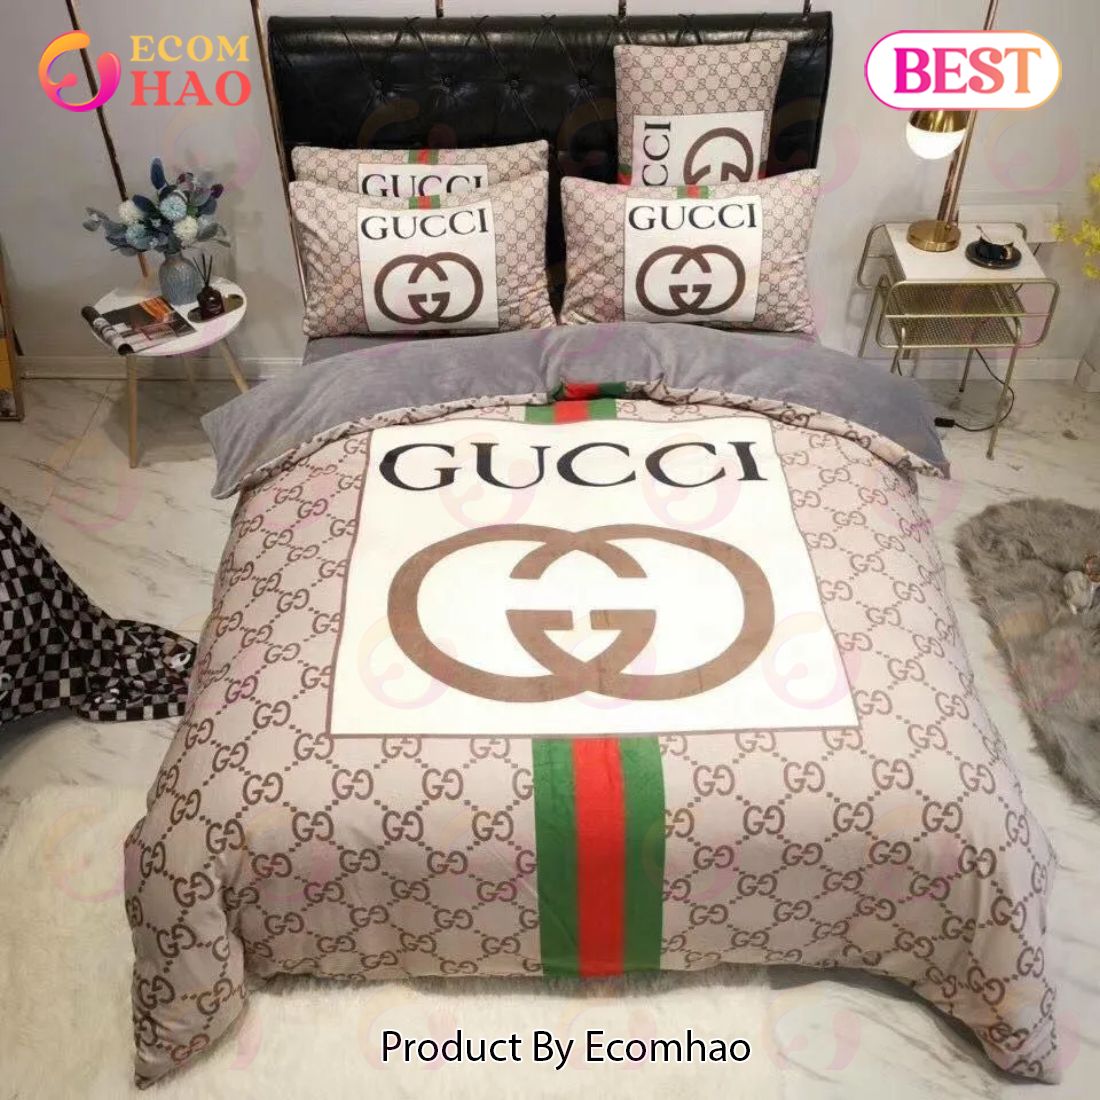 Gucci Beige Luxury Brand High-End Bedding Sets Bedroom Decor Thanksgiving  Decorations For Home Best Luxury Bed Sets - Ecomhao Store